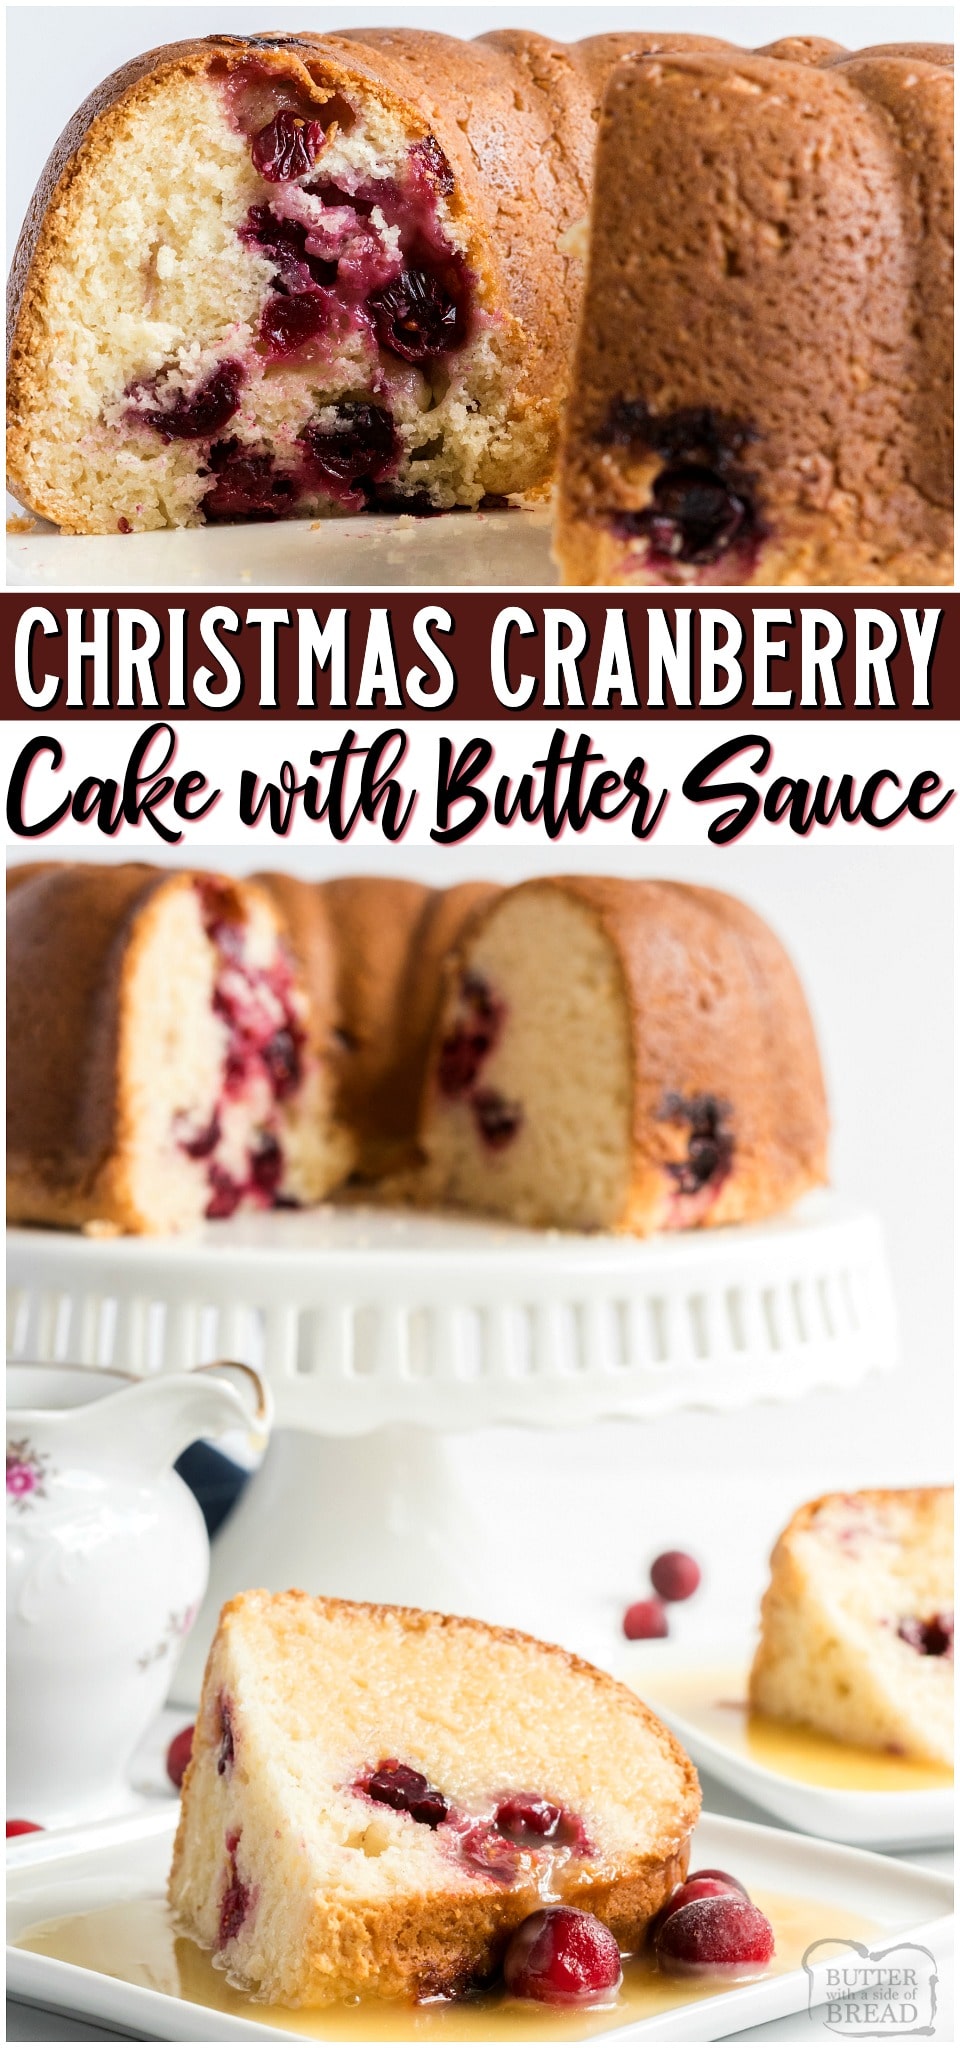 Christmas Cranberry Cake topped with a sweet butter sauce is perfect for Christmas or any occasion! Easy homemade cranberry cake recipe uses fresh cranberries for a delightful, flavorful dessert. #cake #Christmas #cranberry #noeggs #dessert #baking #holidays #easyrecipe from BUTTER WITH A SIDE OF BREAD